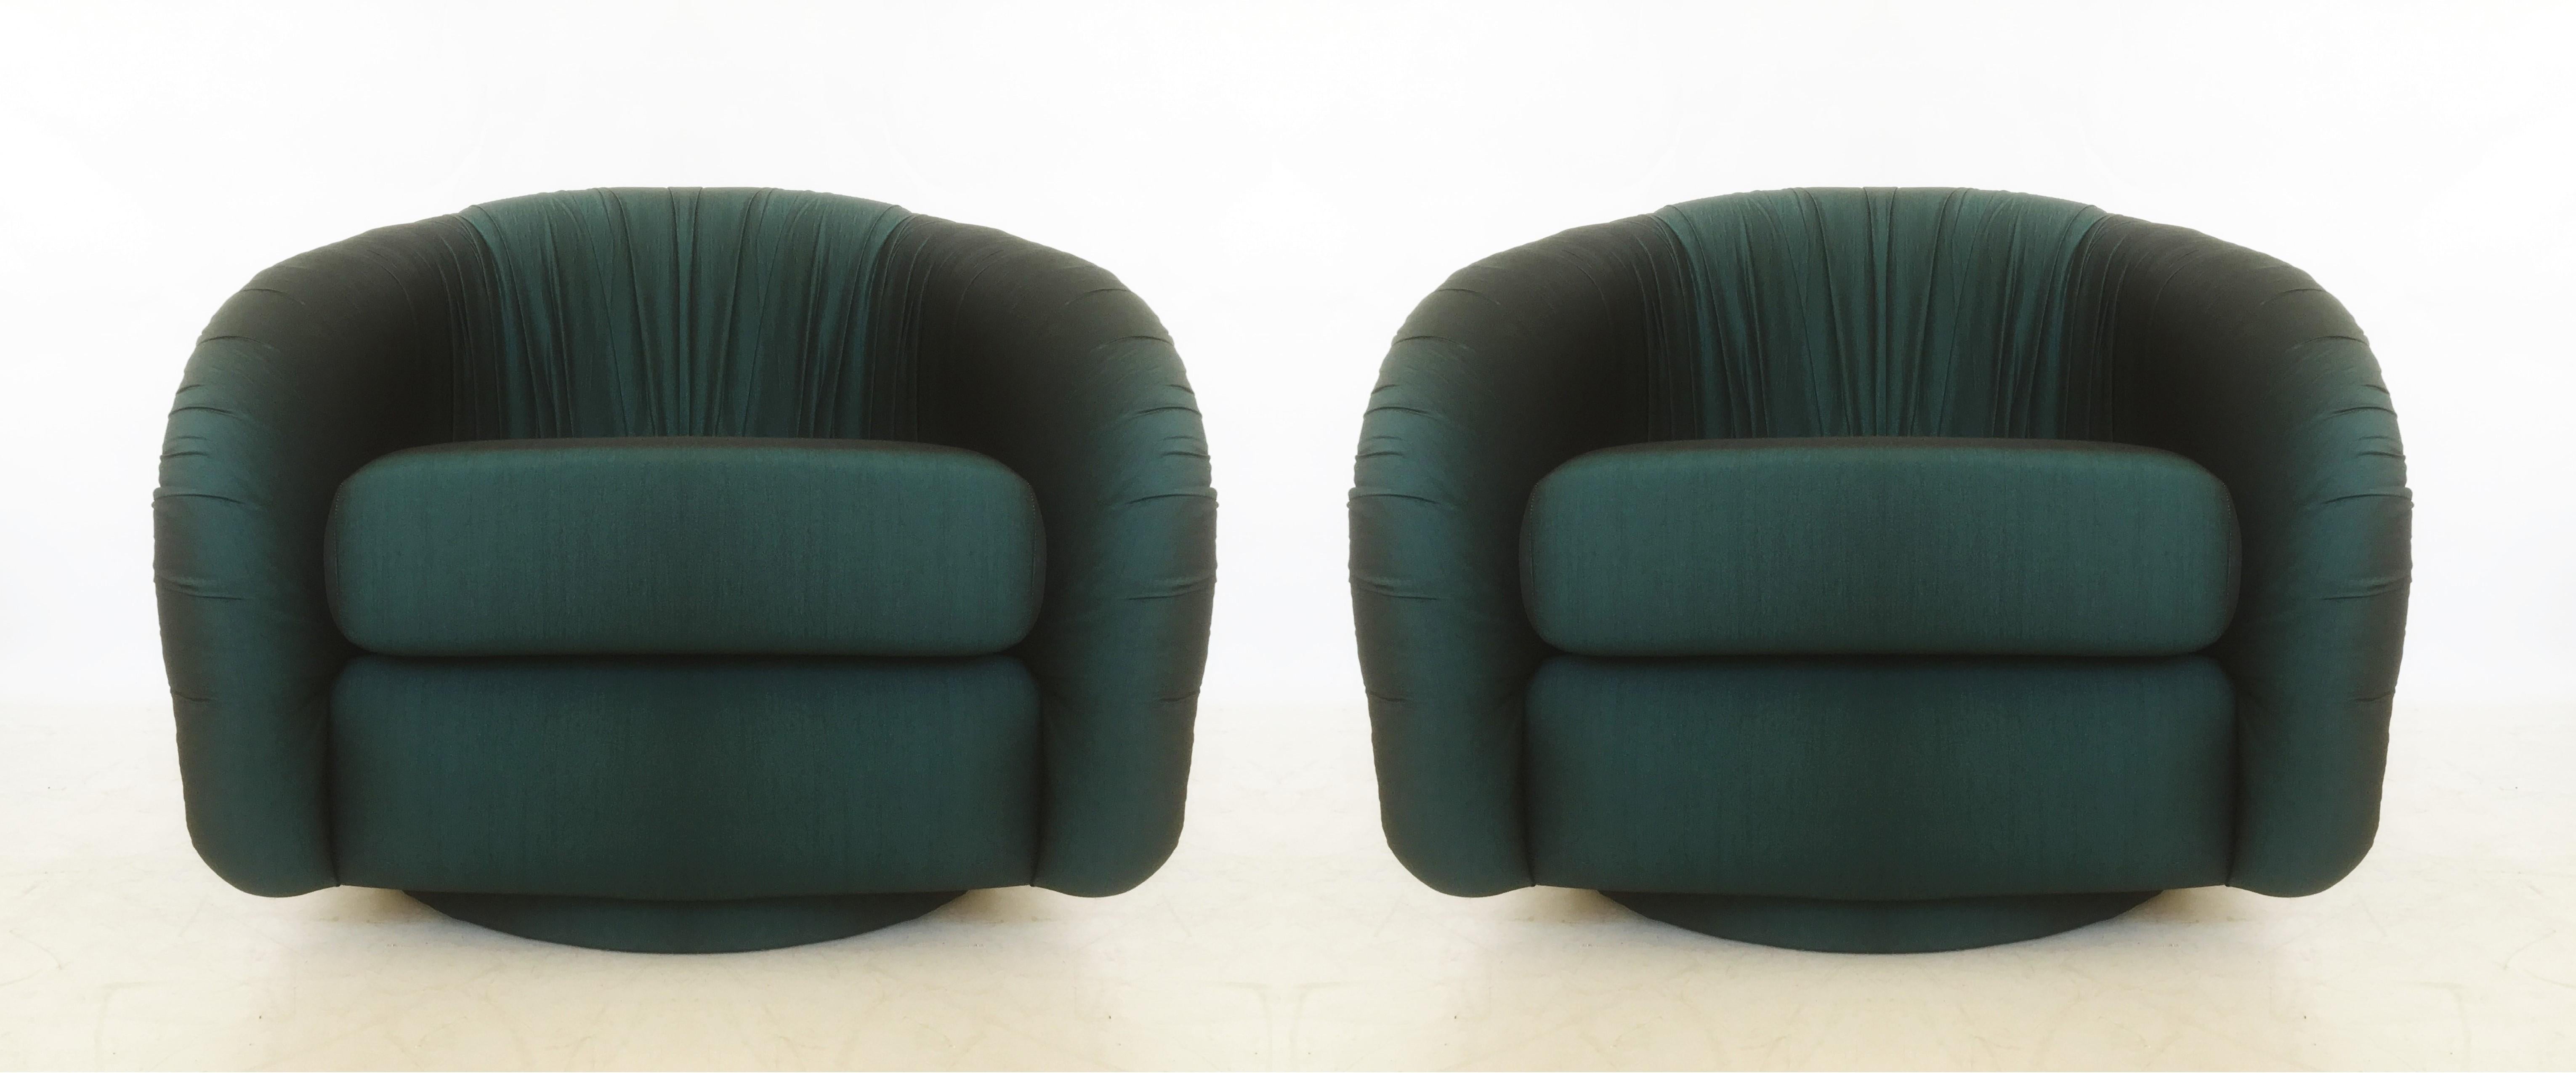 Pair of Mid-century Swivel Chairs in the style of Milo Baughman for Directional In Good Condition For Sale In Dallas, TX